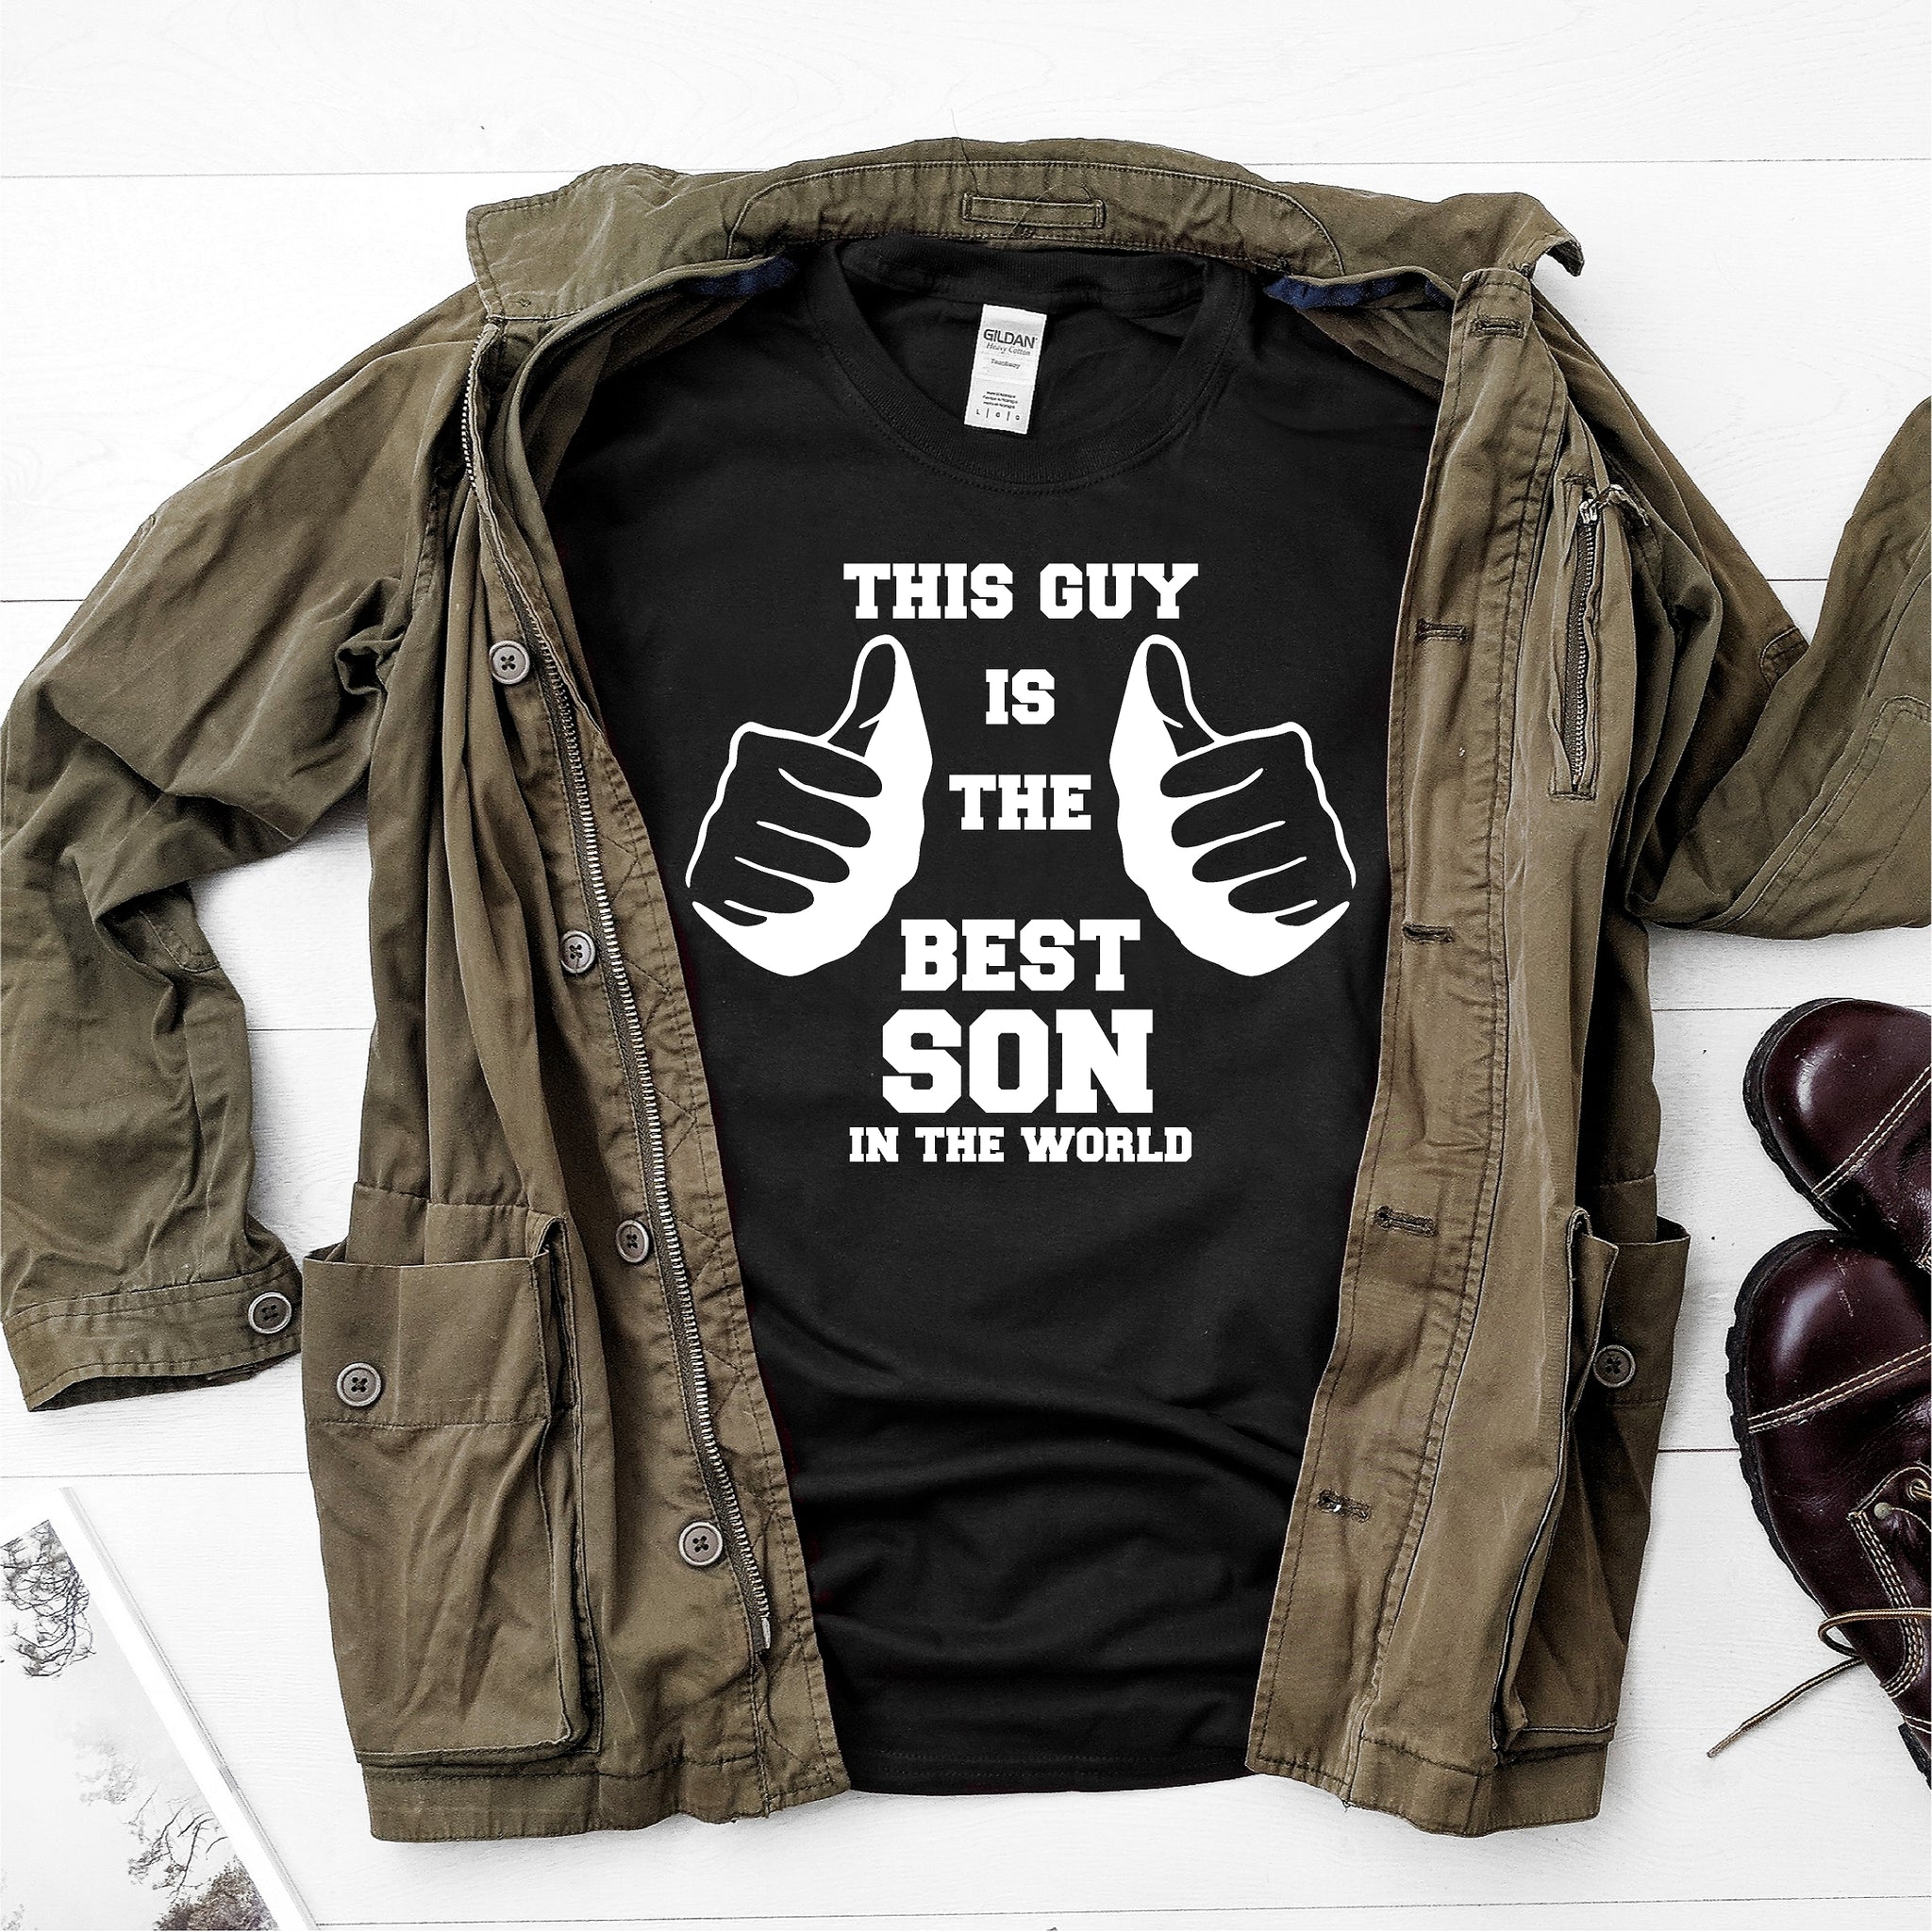 This guy is the best son in the world- Ultra Cotton Short Sleeve T-Shirt - DFHM53